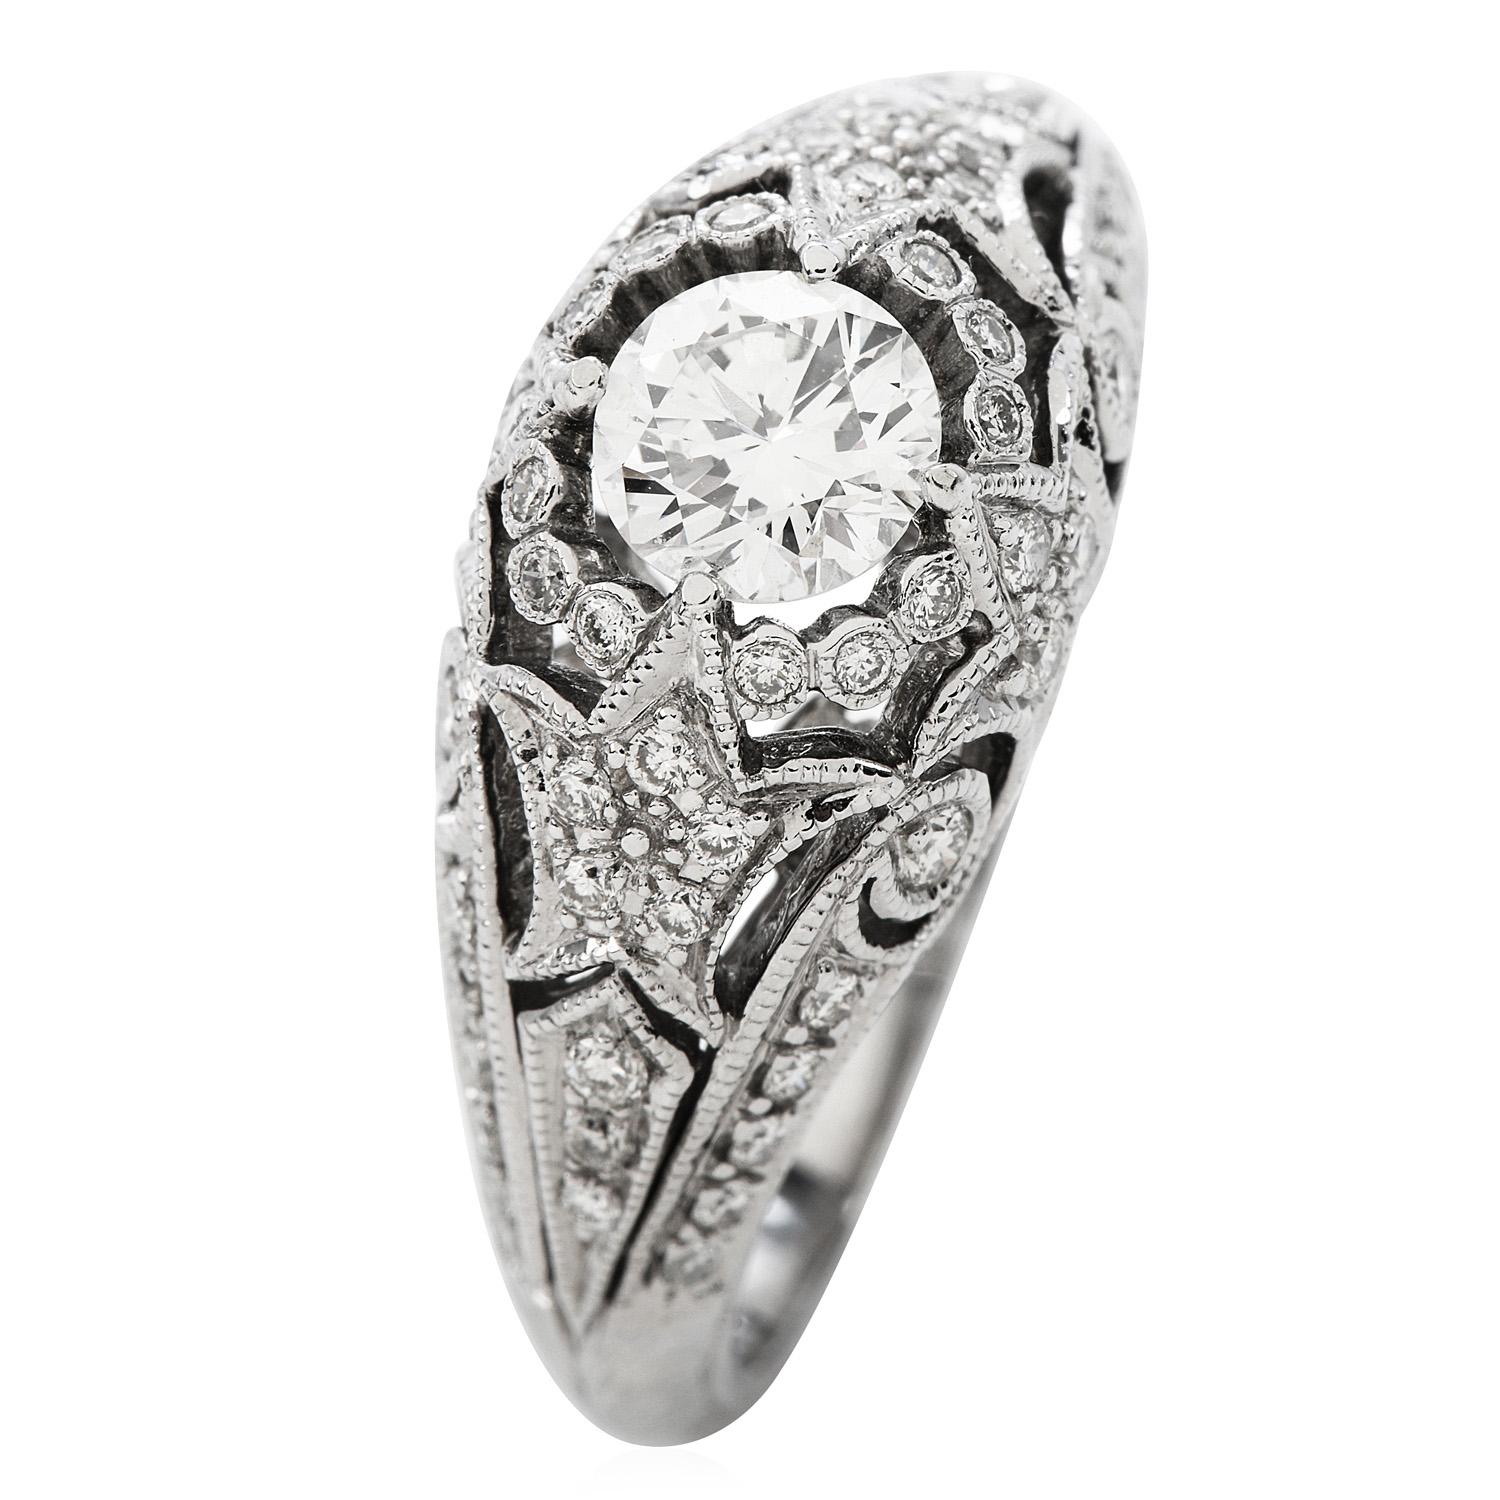 Deco Style  Diamond Gold Filigree Engagement Ring

Take a step back in time with this vintage art deco style  Diamond Engagement

ring crafted in luxurious 14K white gold weighing approximately 4.9 grams.

Intricate cut-out and filigree patterns run